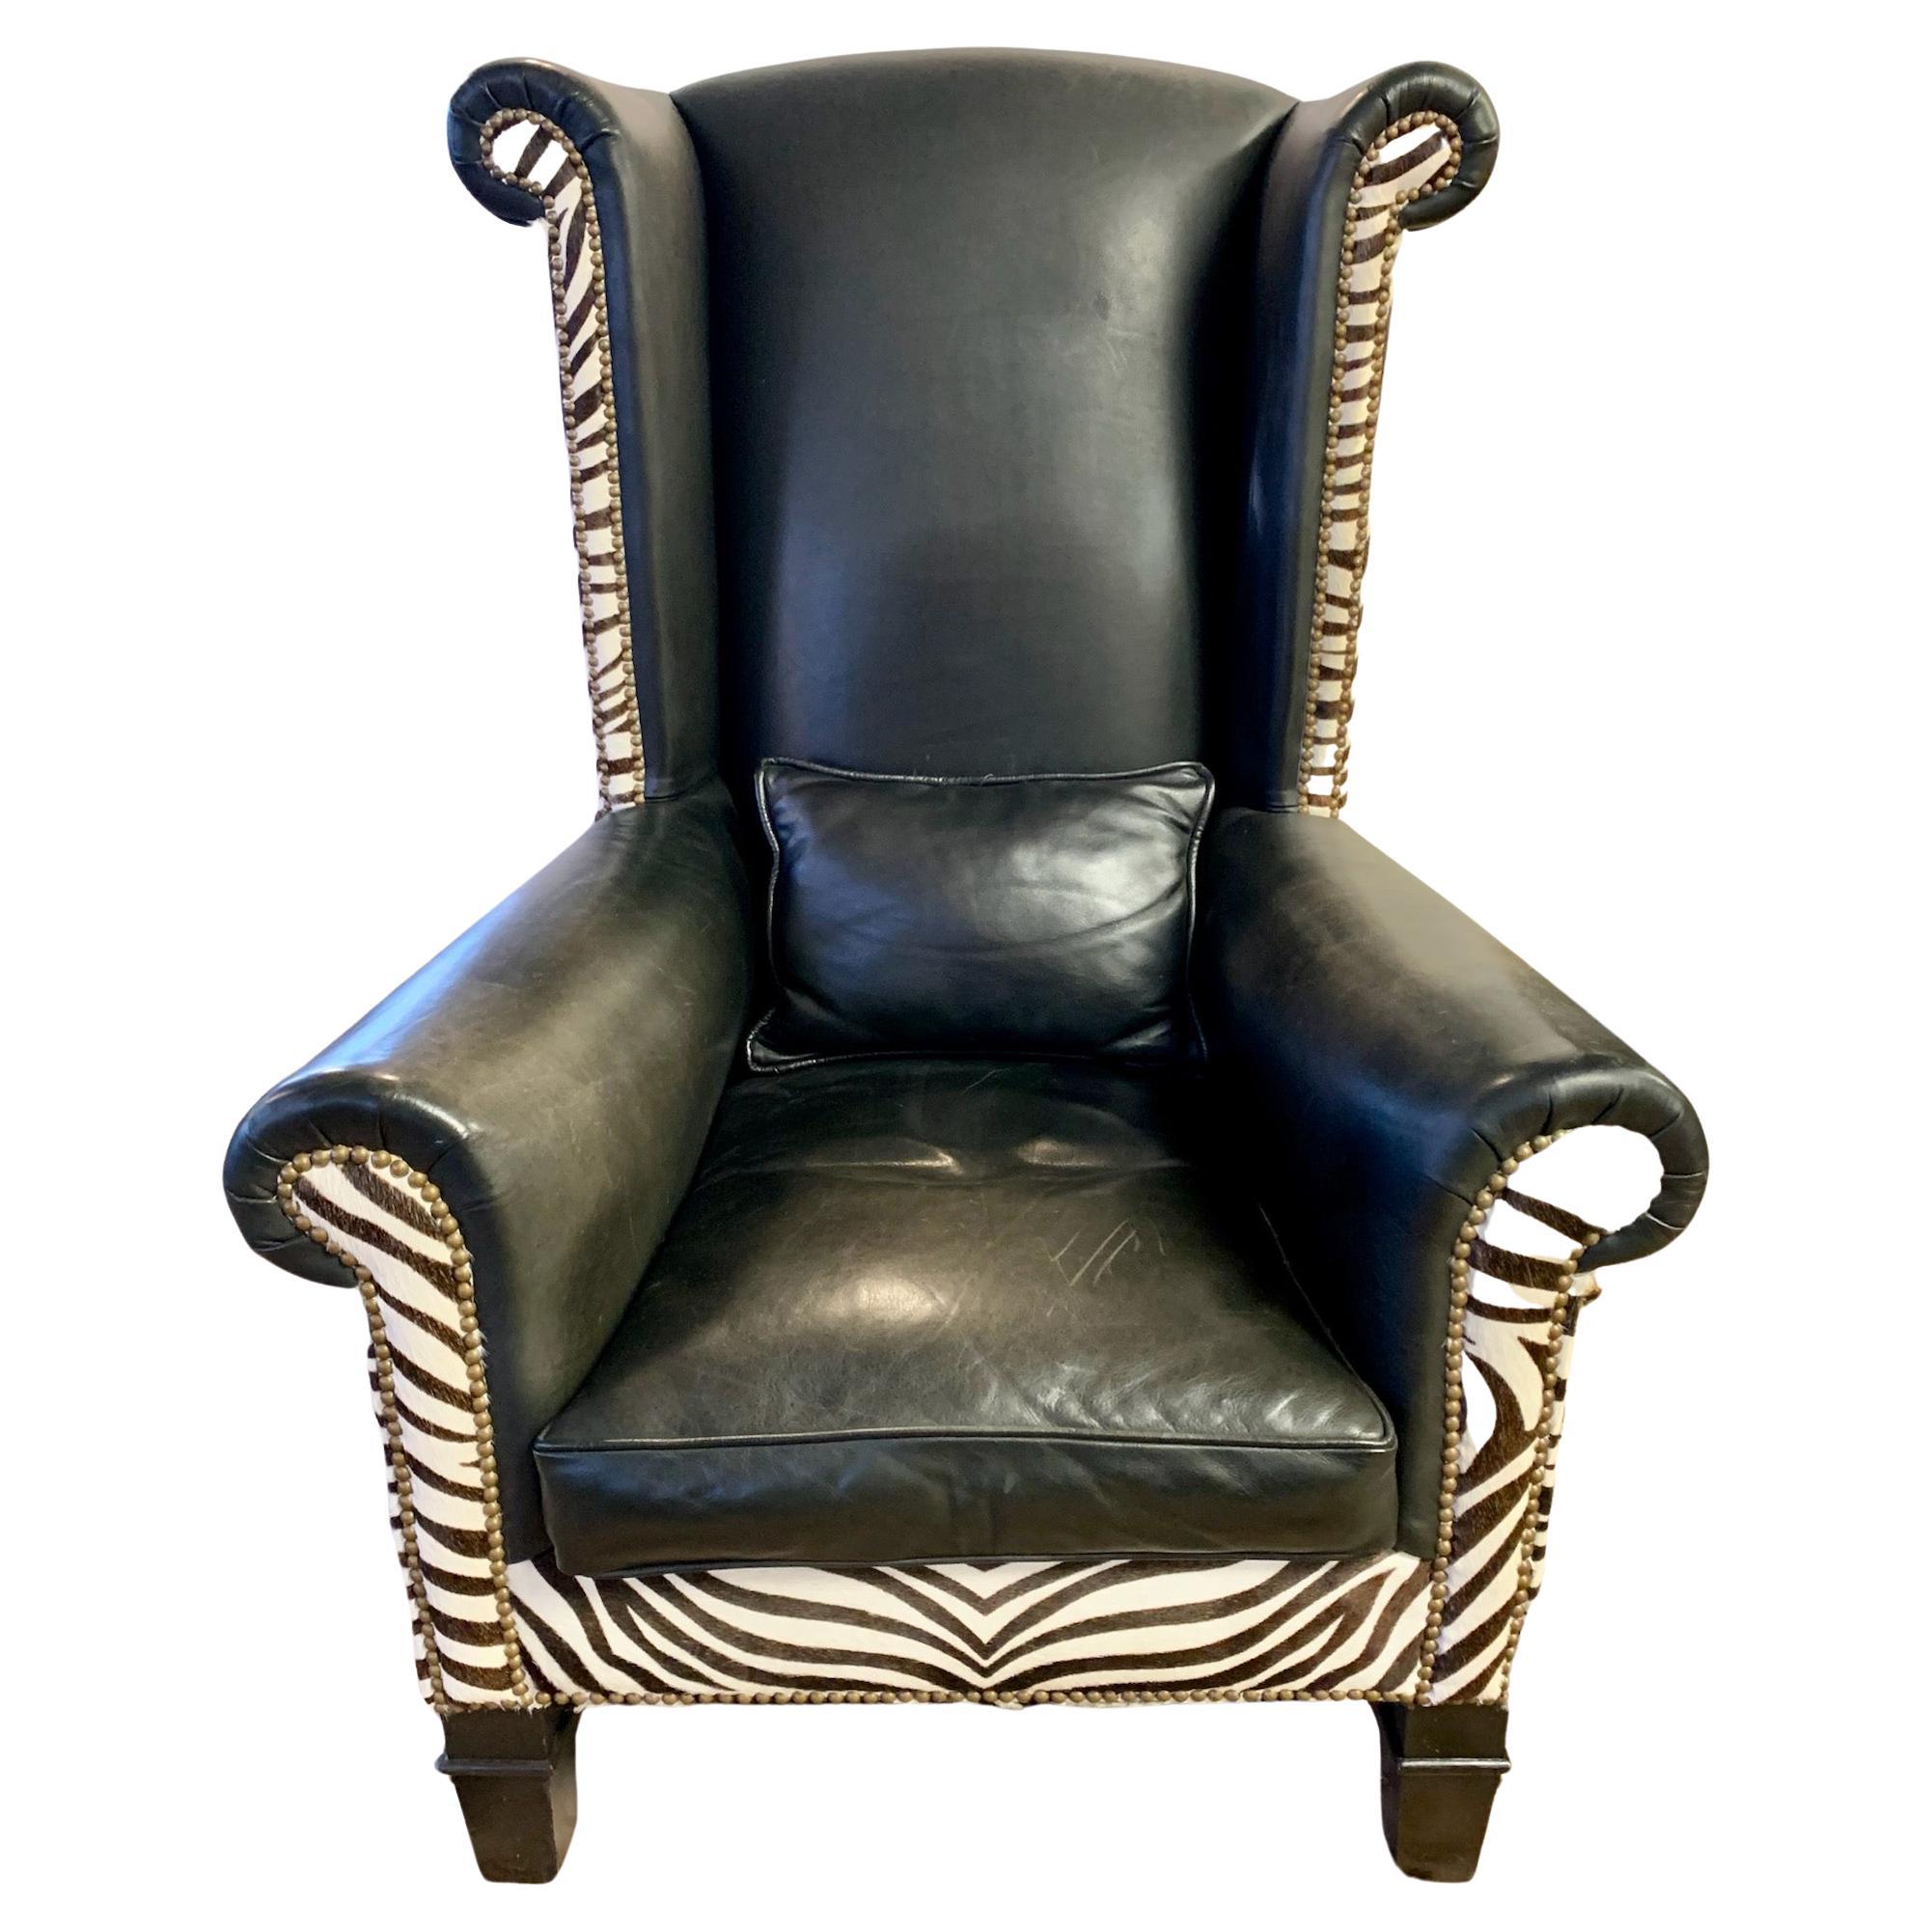 Handsome Tall Black Leather and Zebra Print Wingback Chair